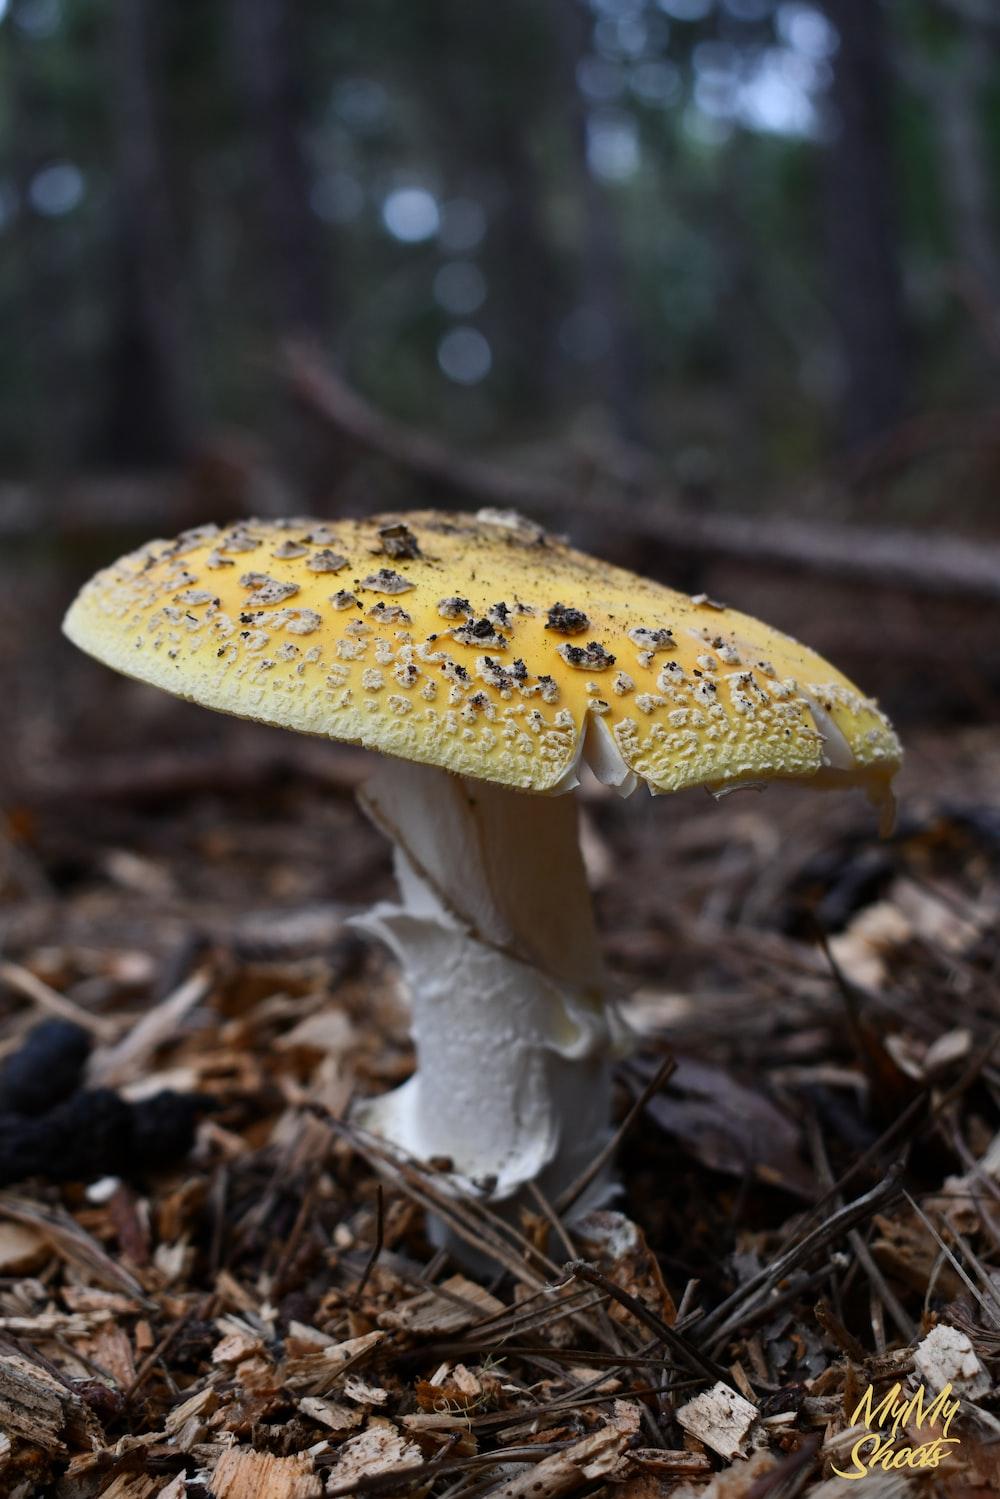 A Mushroom Growing In The Woods Photo Fungus Image